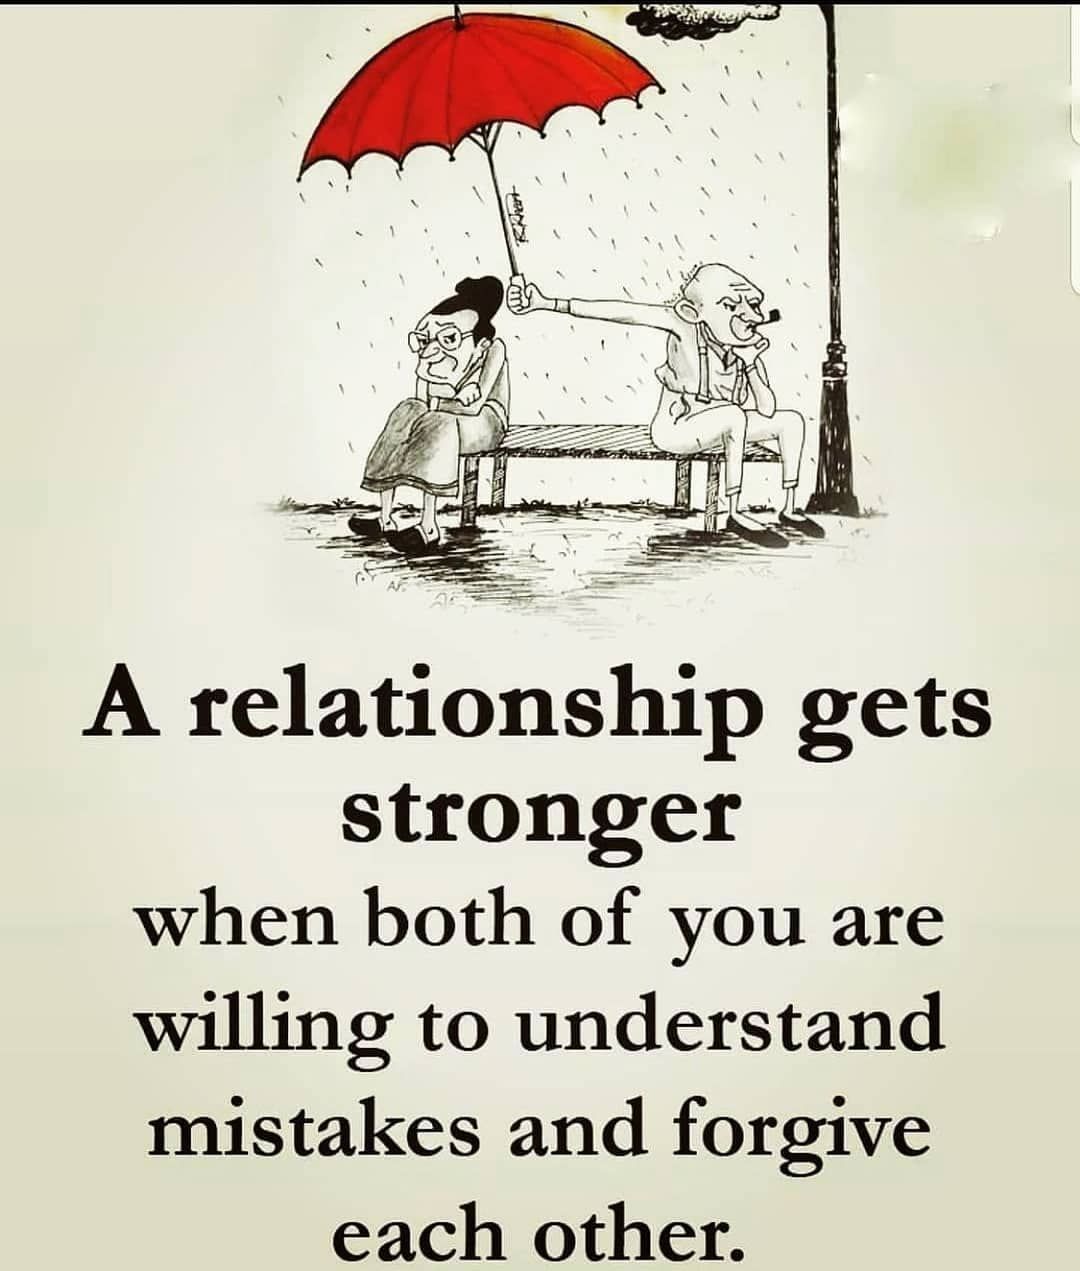 A relationship gets stronger when both of you are willing to understand mistakes and forgive each other.